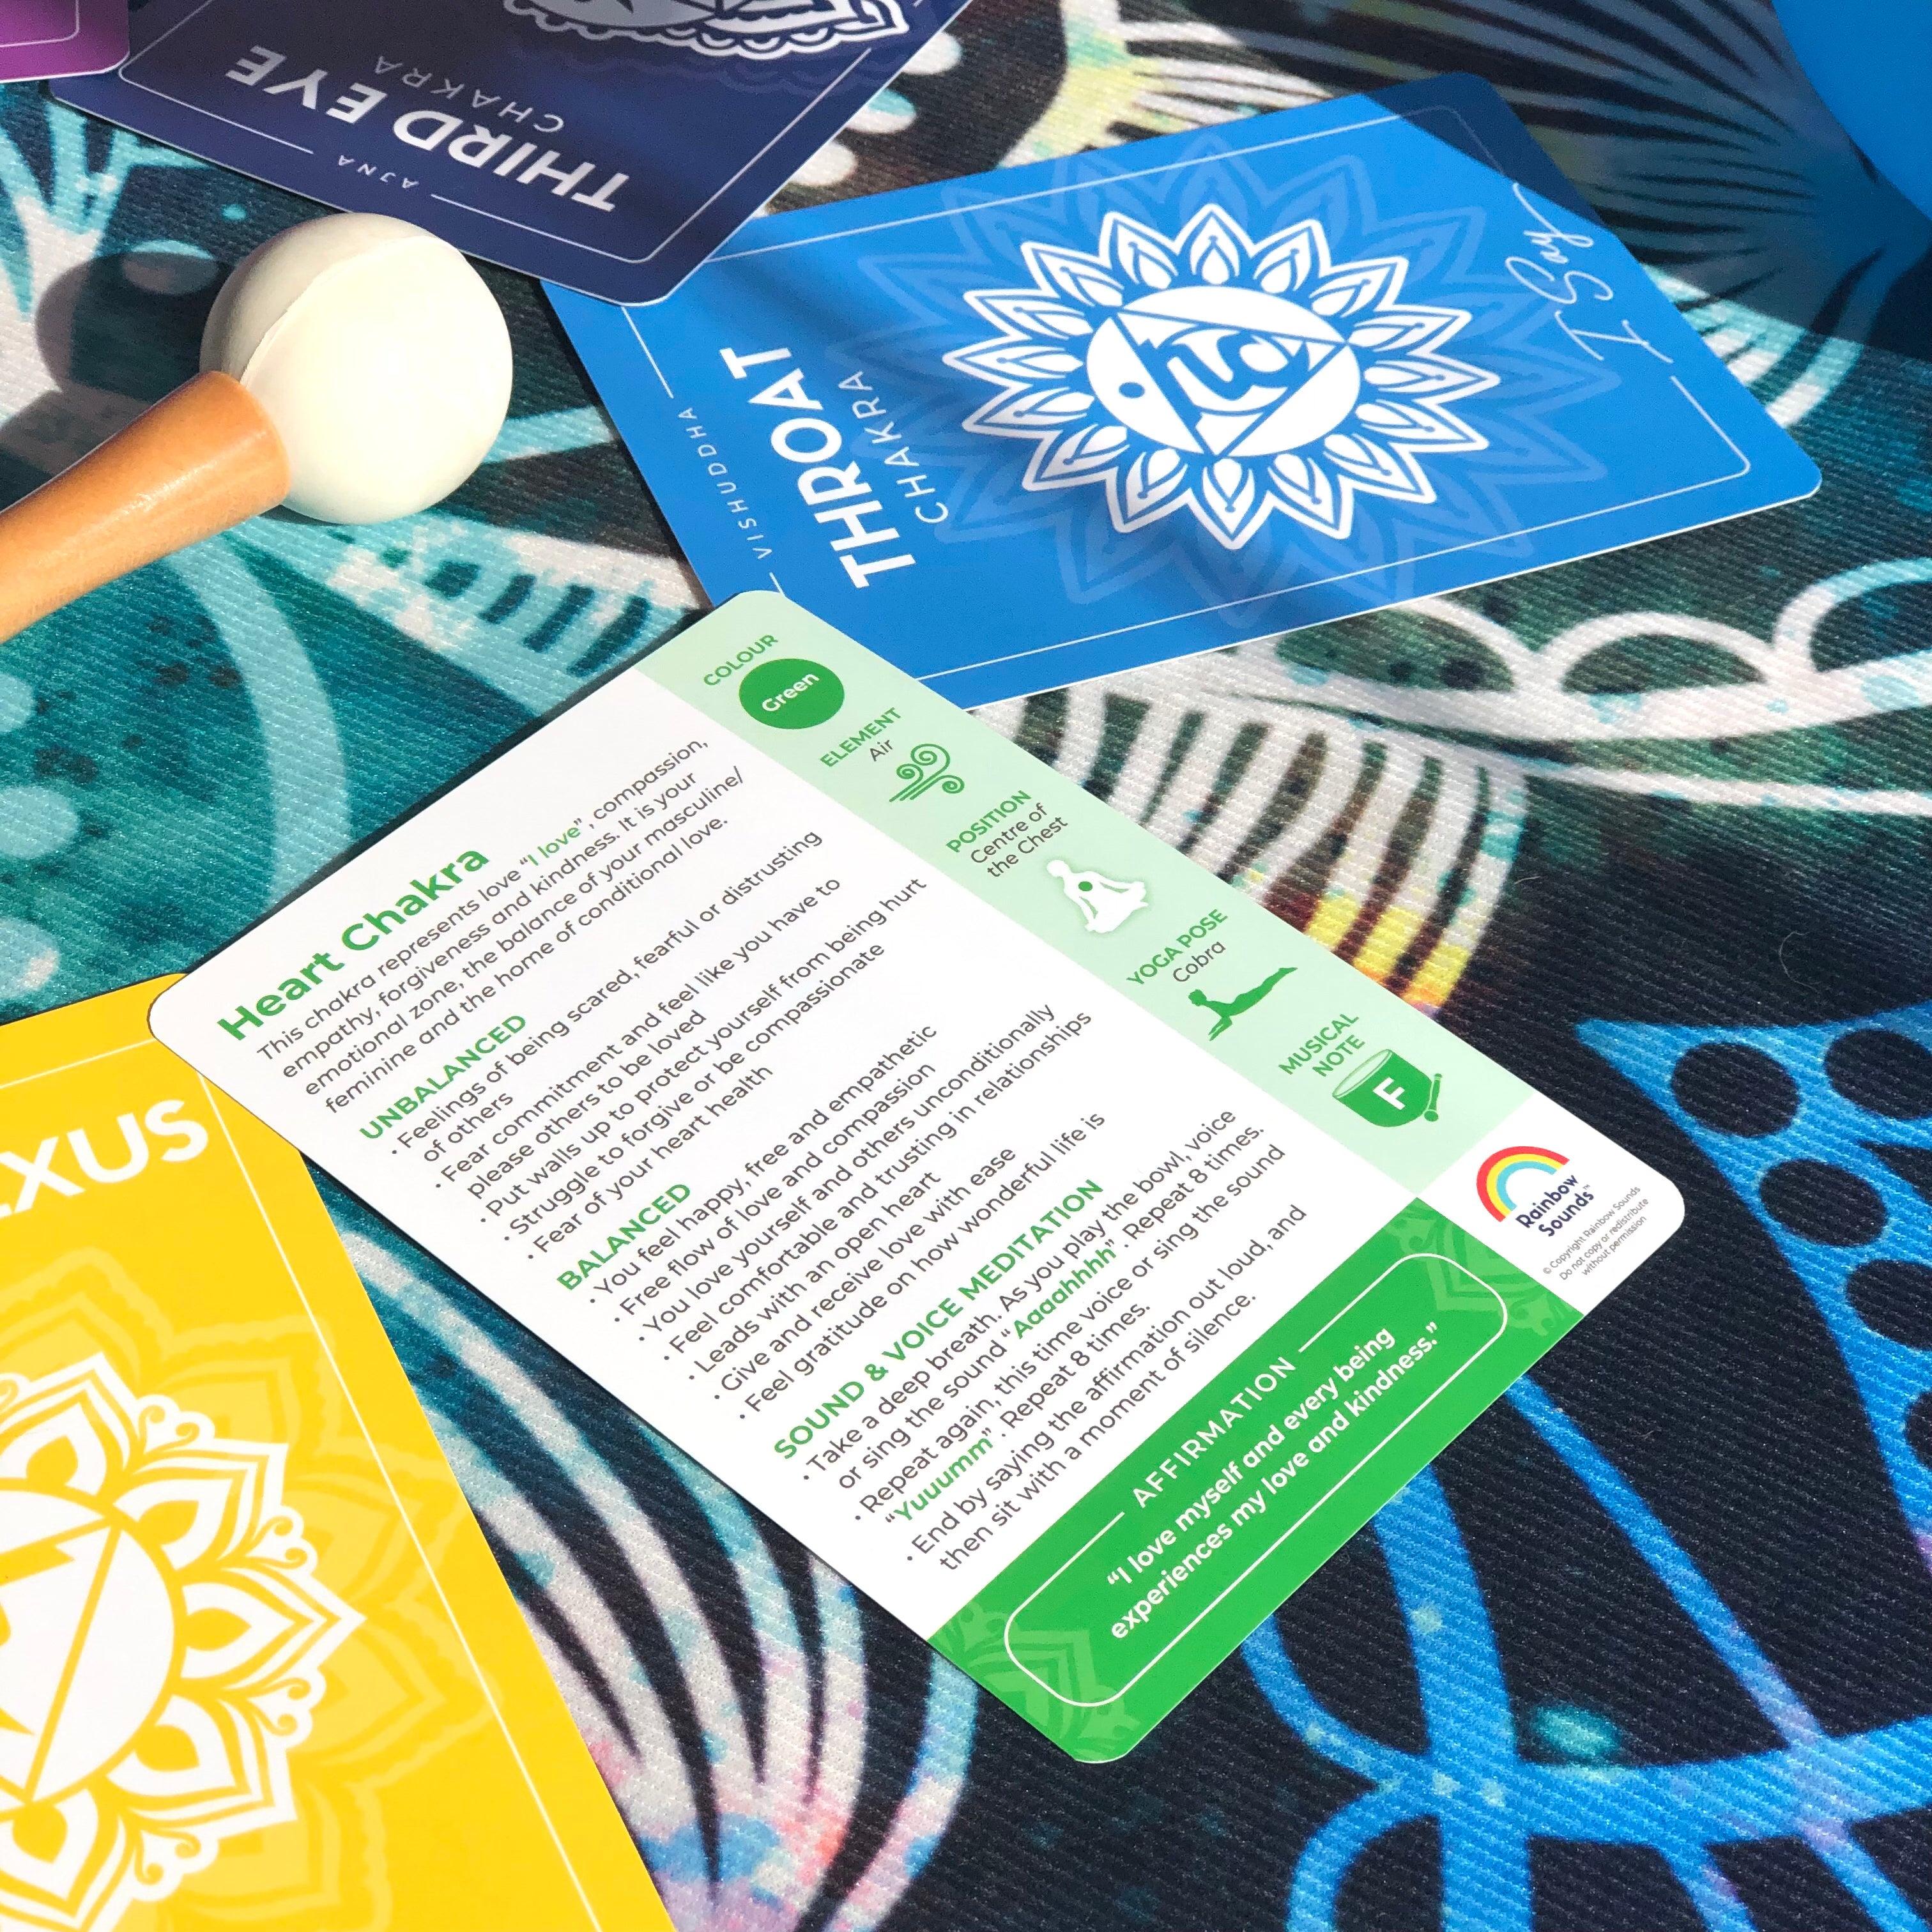 Chakra Cards Pack